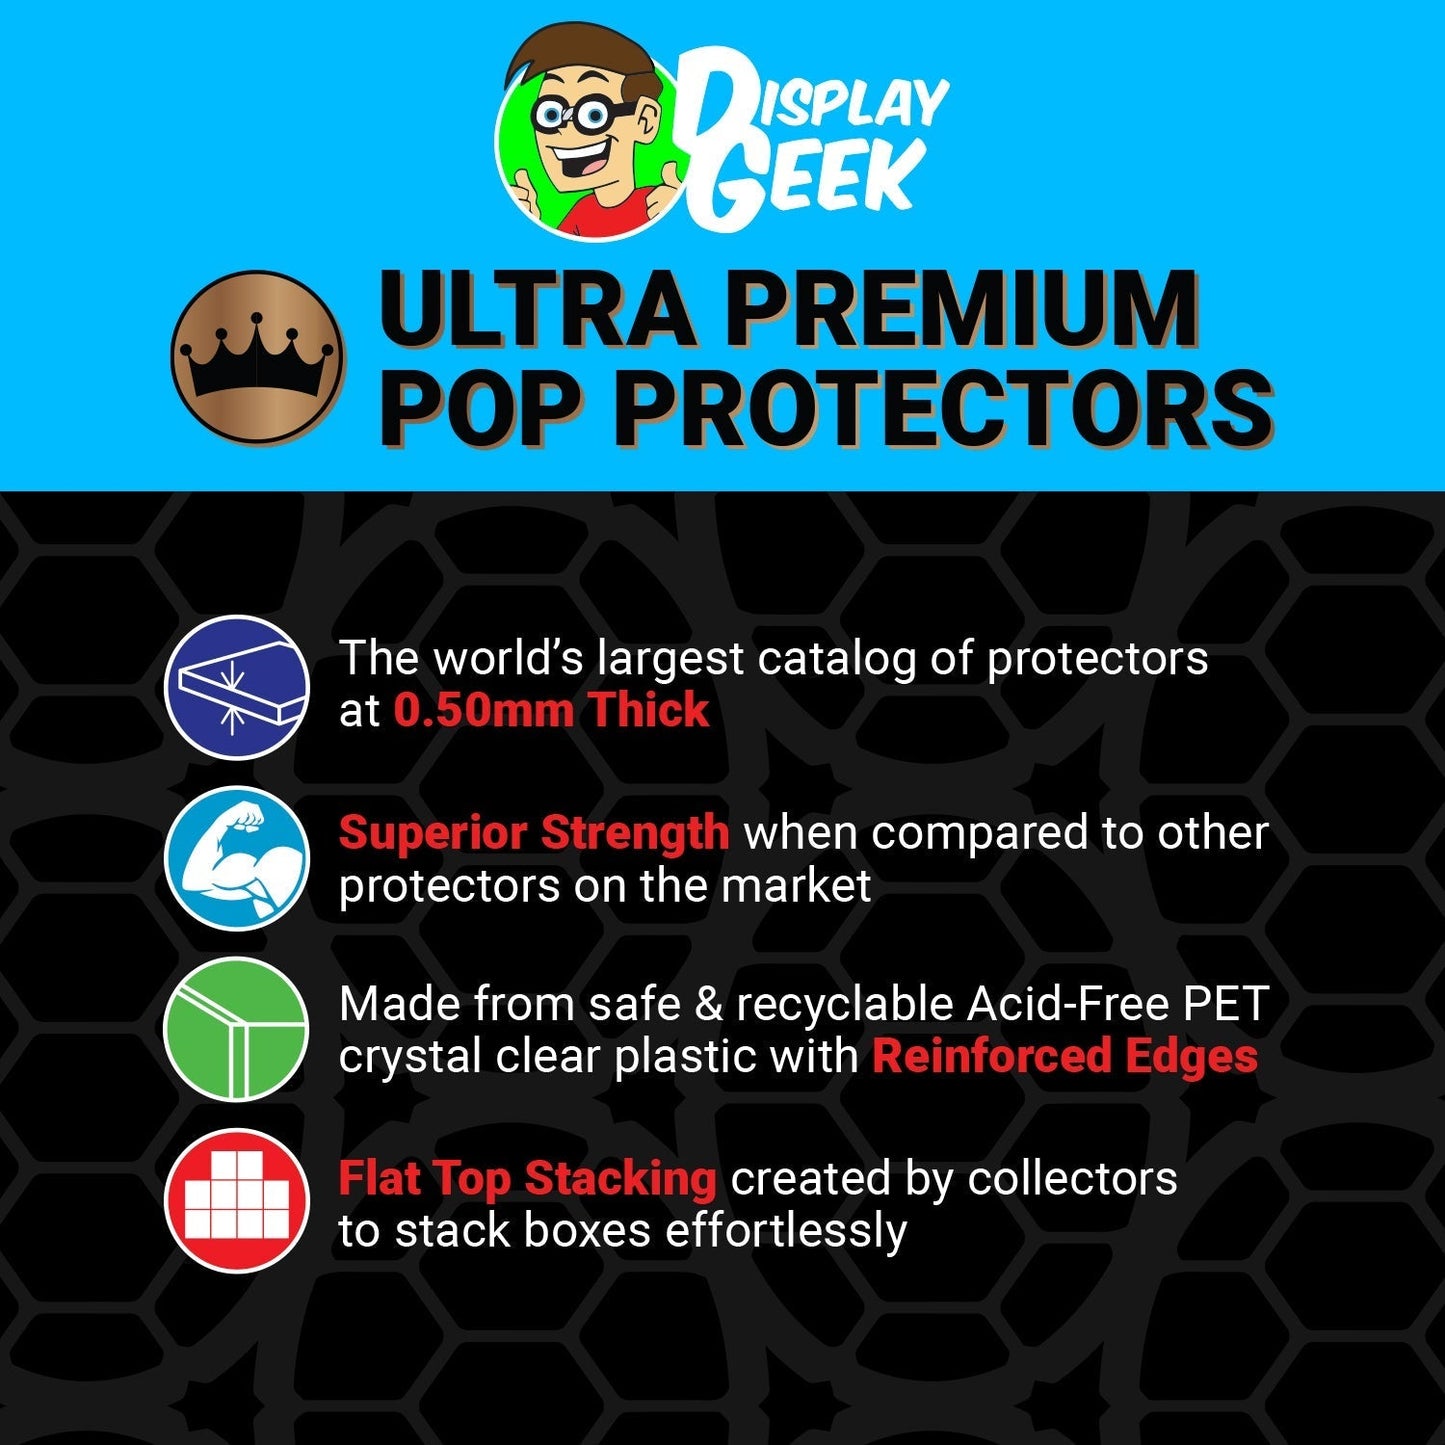 Pop Protector for 9 inch Giant Buzz Lightyear Funko Pop - PPG Pop Protector Guide Search Created by Display Geek